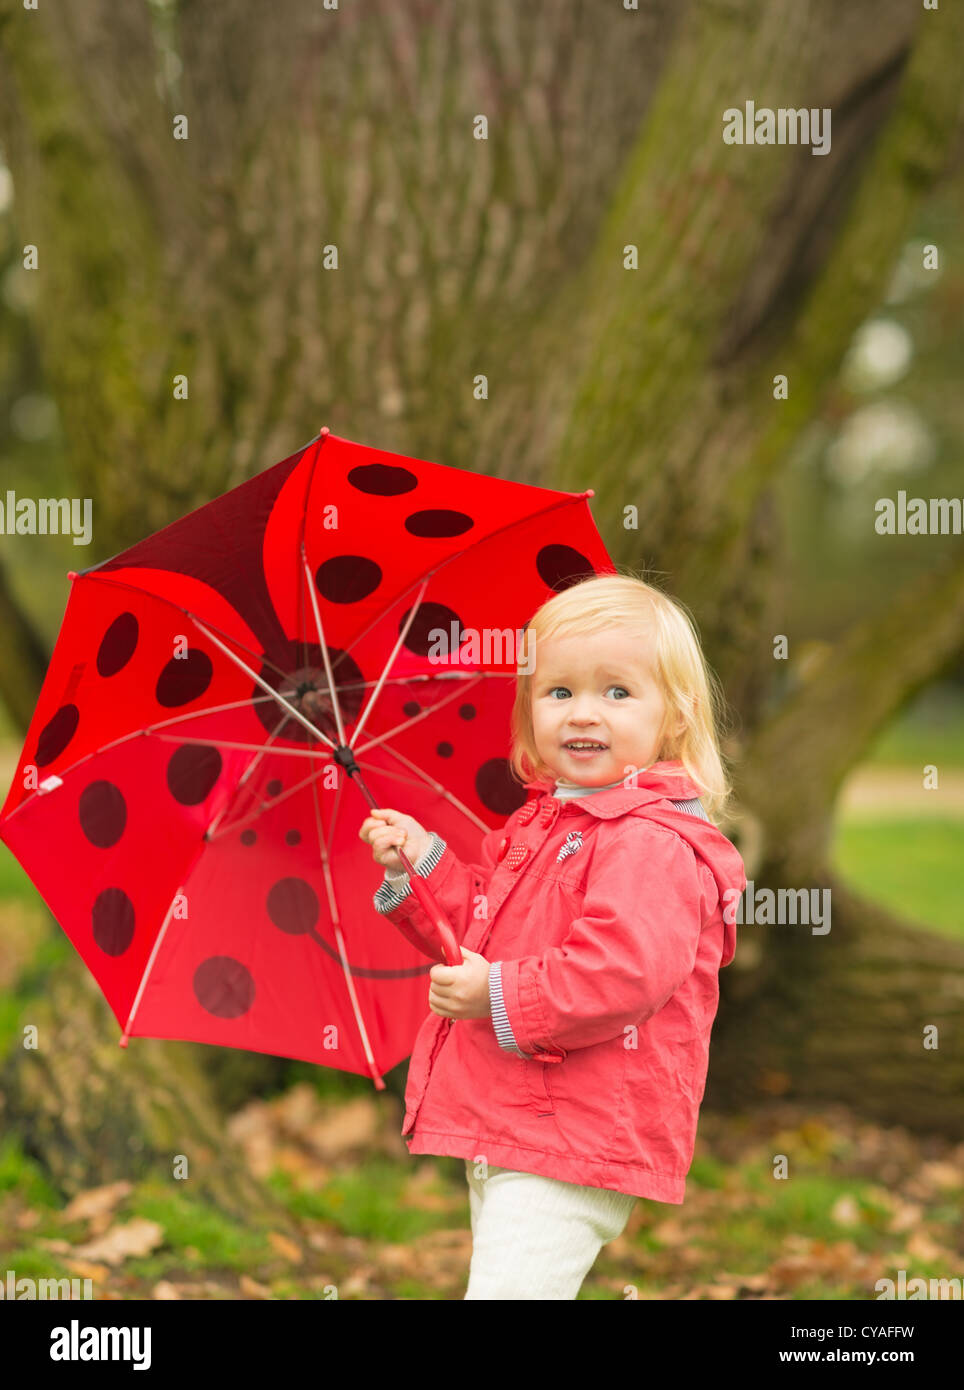 Portrait of happy baby with red umbrella outdoors Stock Photo